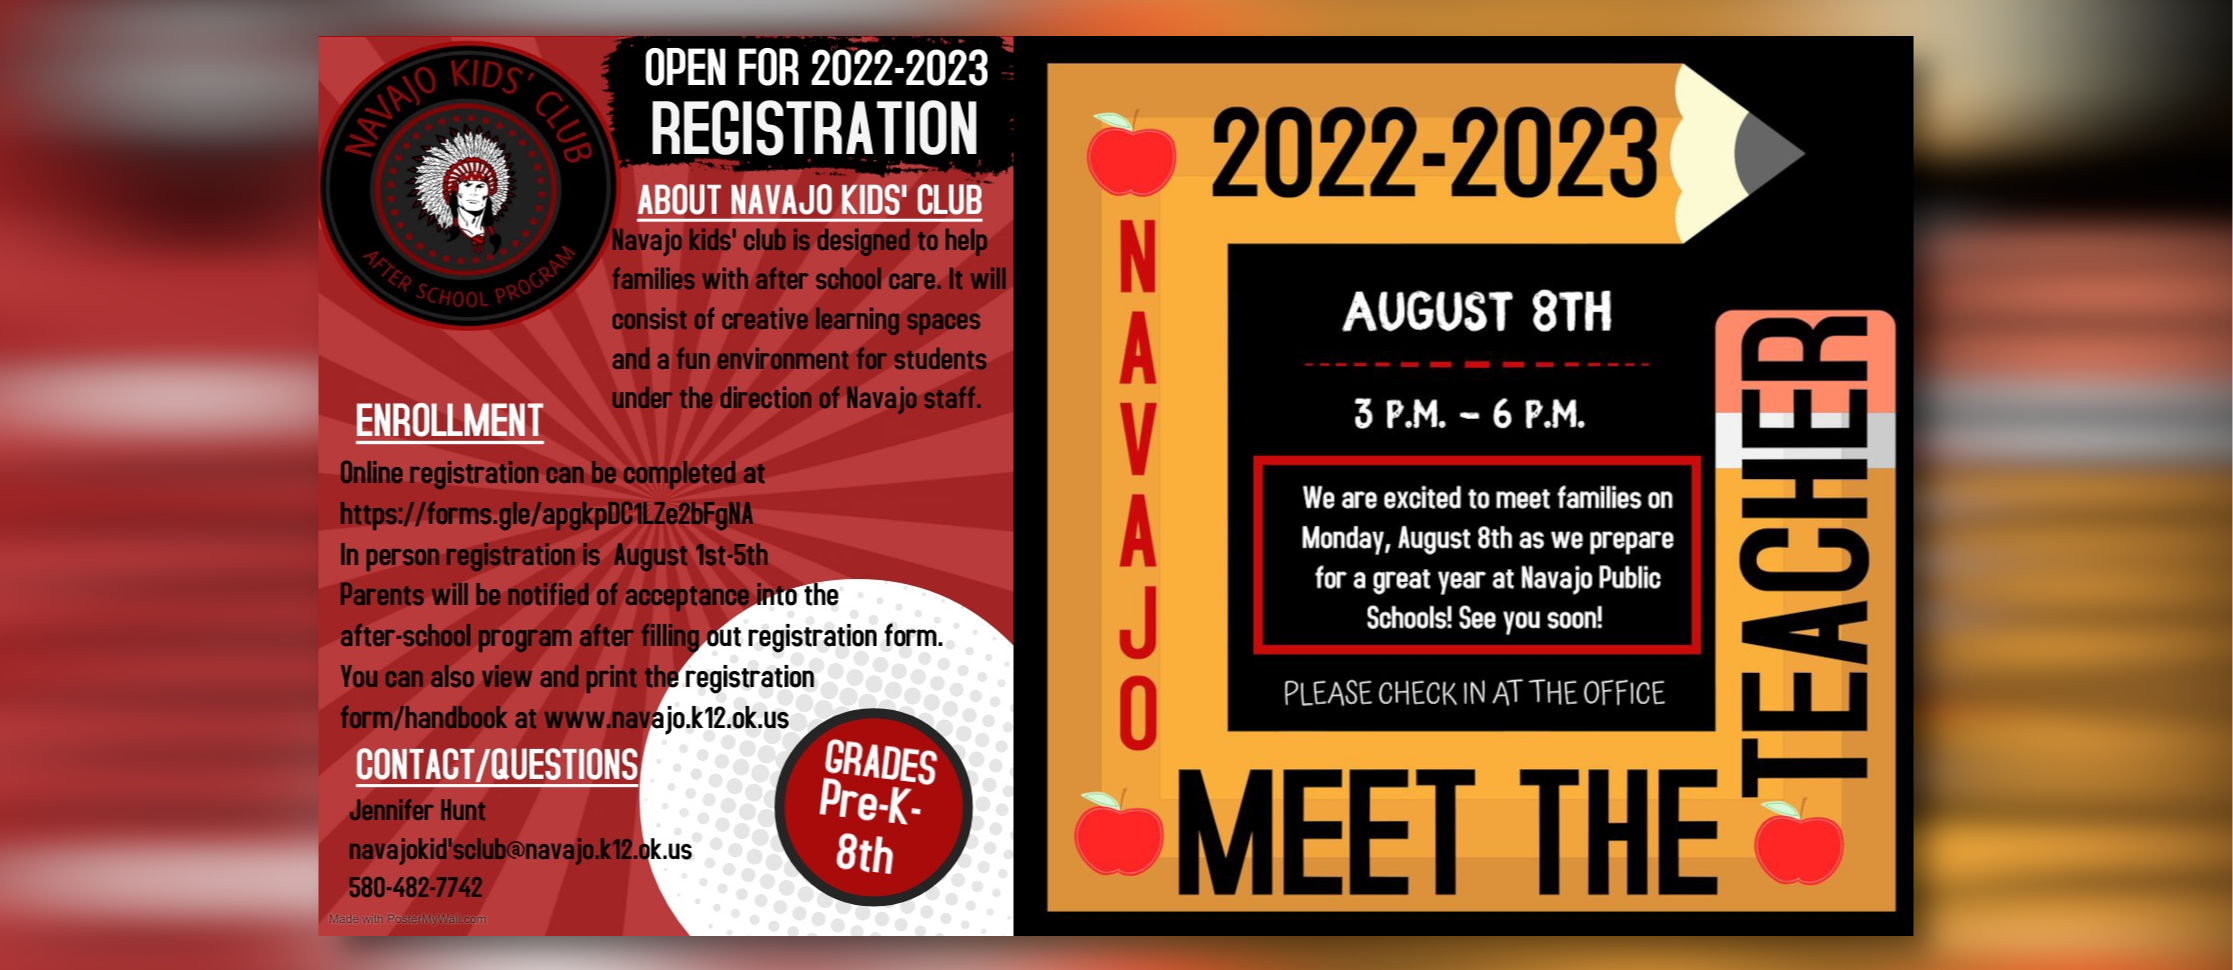 Open for 2022-2023 Registration. About Navajo Kid's Club: Navajo kid's club is designed to help families with after school care. It will consist of creative learning spaces and a fun environment for students under the direction of Navajo staff. Enrollment: Online registration can be completed at https://forms.gle/apgkpDC1LZe2bFgNA In person registration is August 1st-5th. Parents will be notified of acceptance into the after-school program after filling out registration form. You can also view and print the Registration form/handbook at www.navajo.k12.ok.us Contact/Questions: Jennifer Hunt at navajokid'sclub@navajo.k12.ok.us 580-482-7742.   Grades Pre-k - 8th.  2022-2023                     Navajo Meet the Teacher. August 8th, 3pm - 6pm. We are excited to meet families on Monday, August 8th as we prepare for a great year at Navajo Public Schools!. See you soon! Please check in at the ofice.